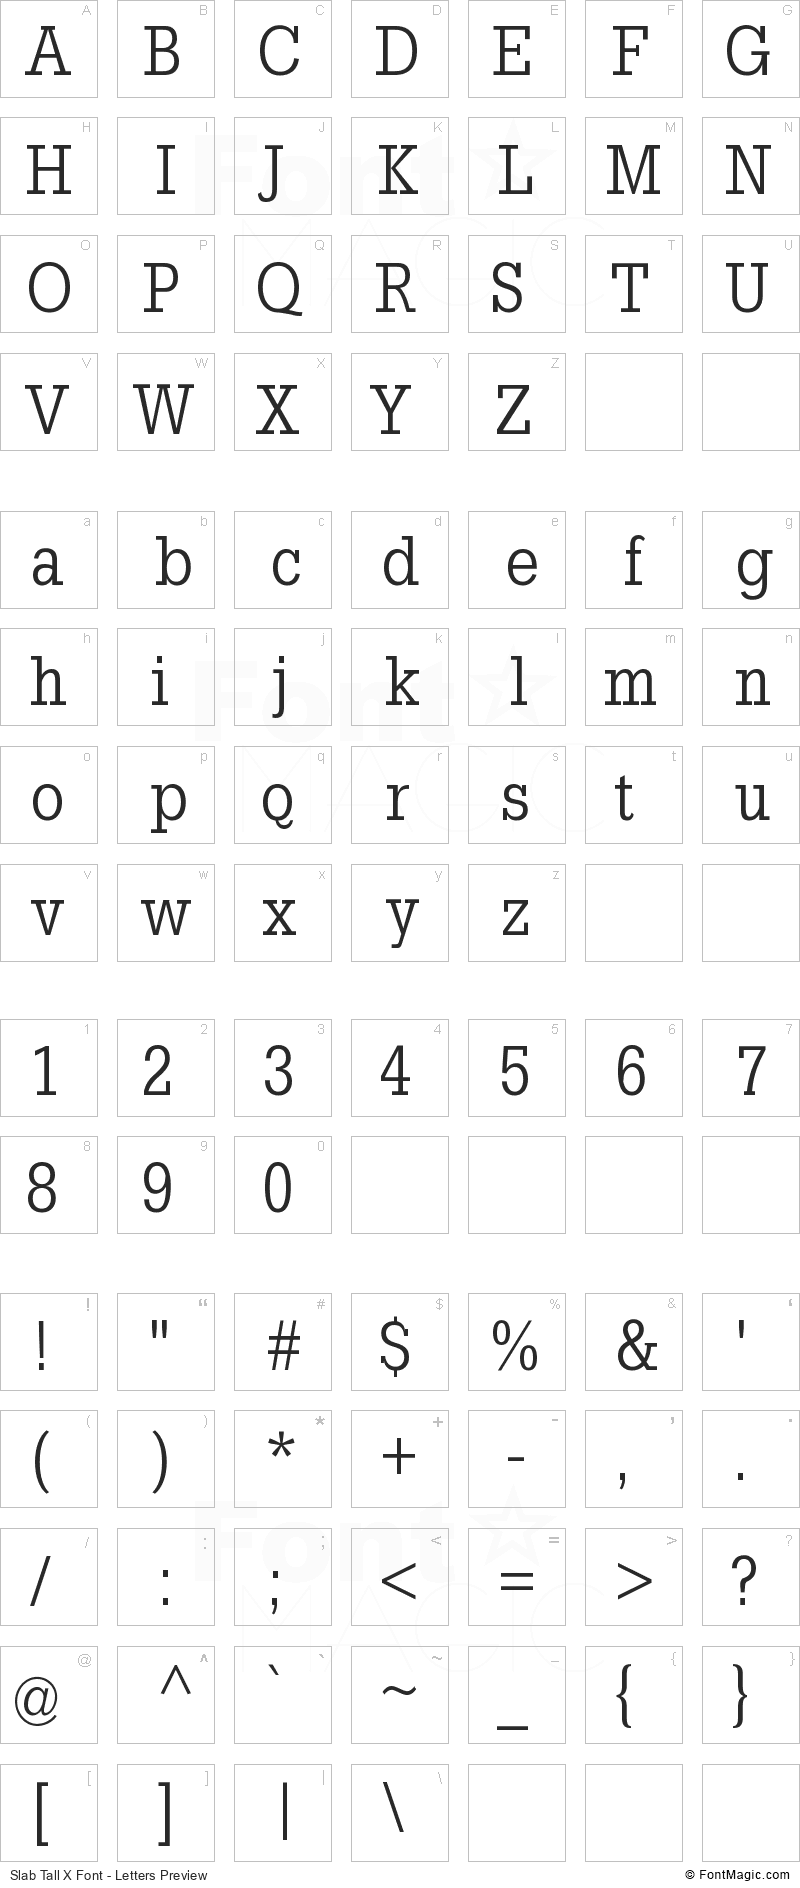 Slab Tall X Font - All Latters Preview Chart